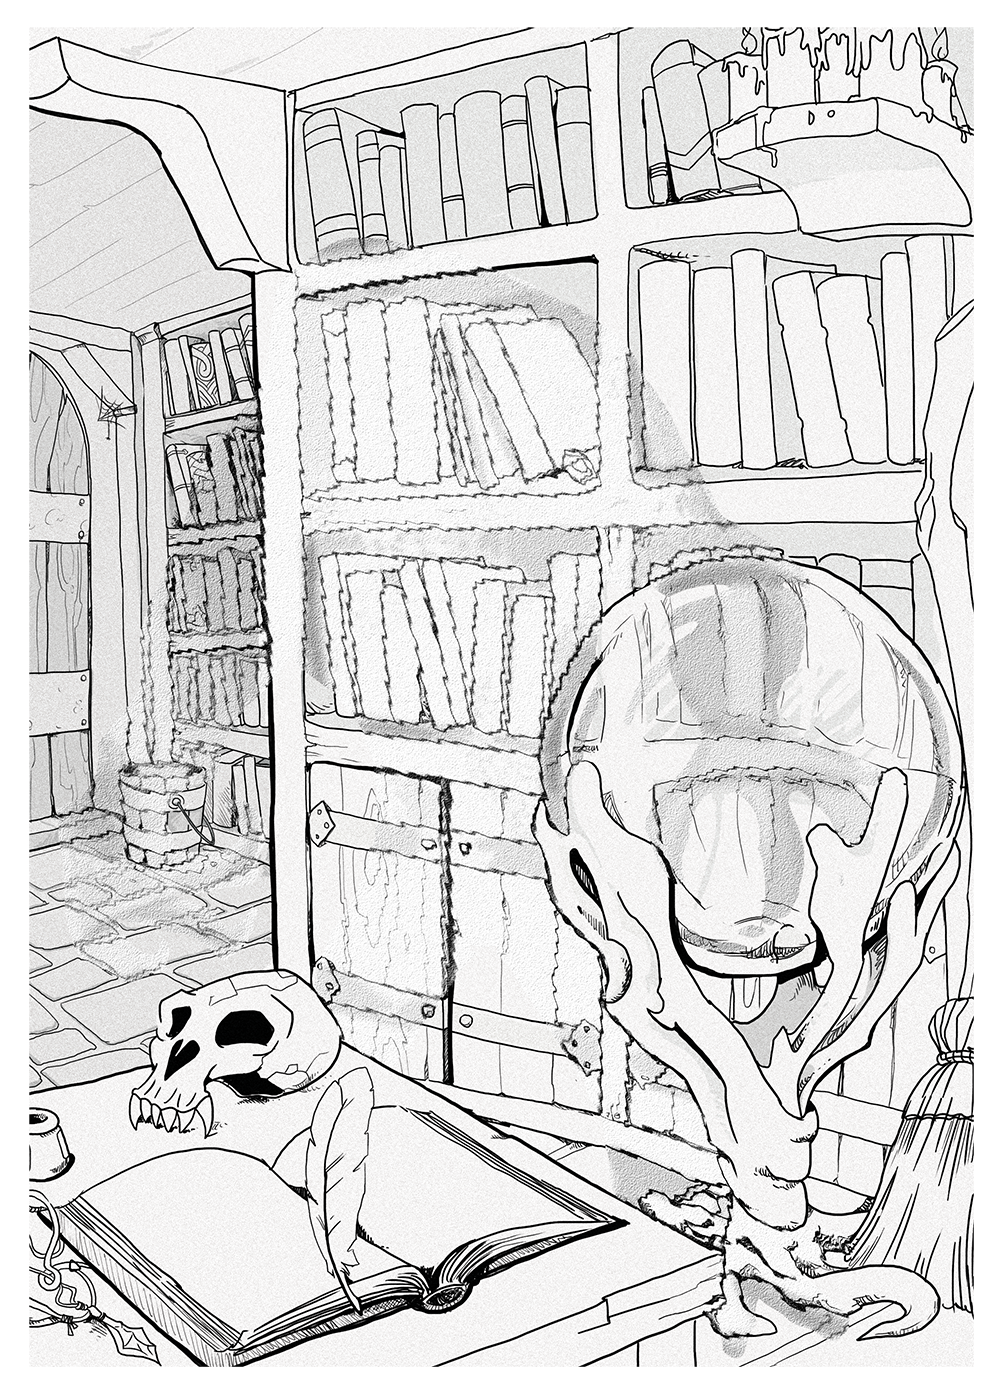 A line art drawing of a crystal ball in a library attempts to depict the concept of invisibility.